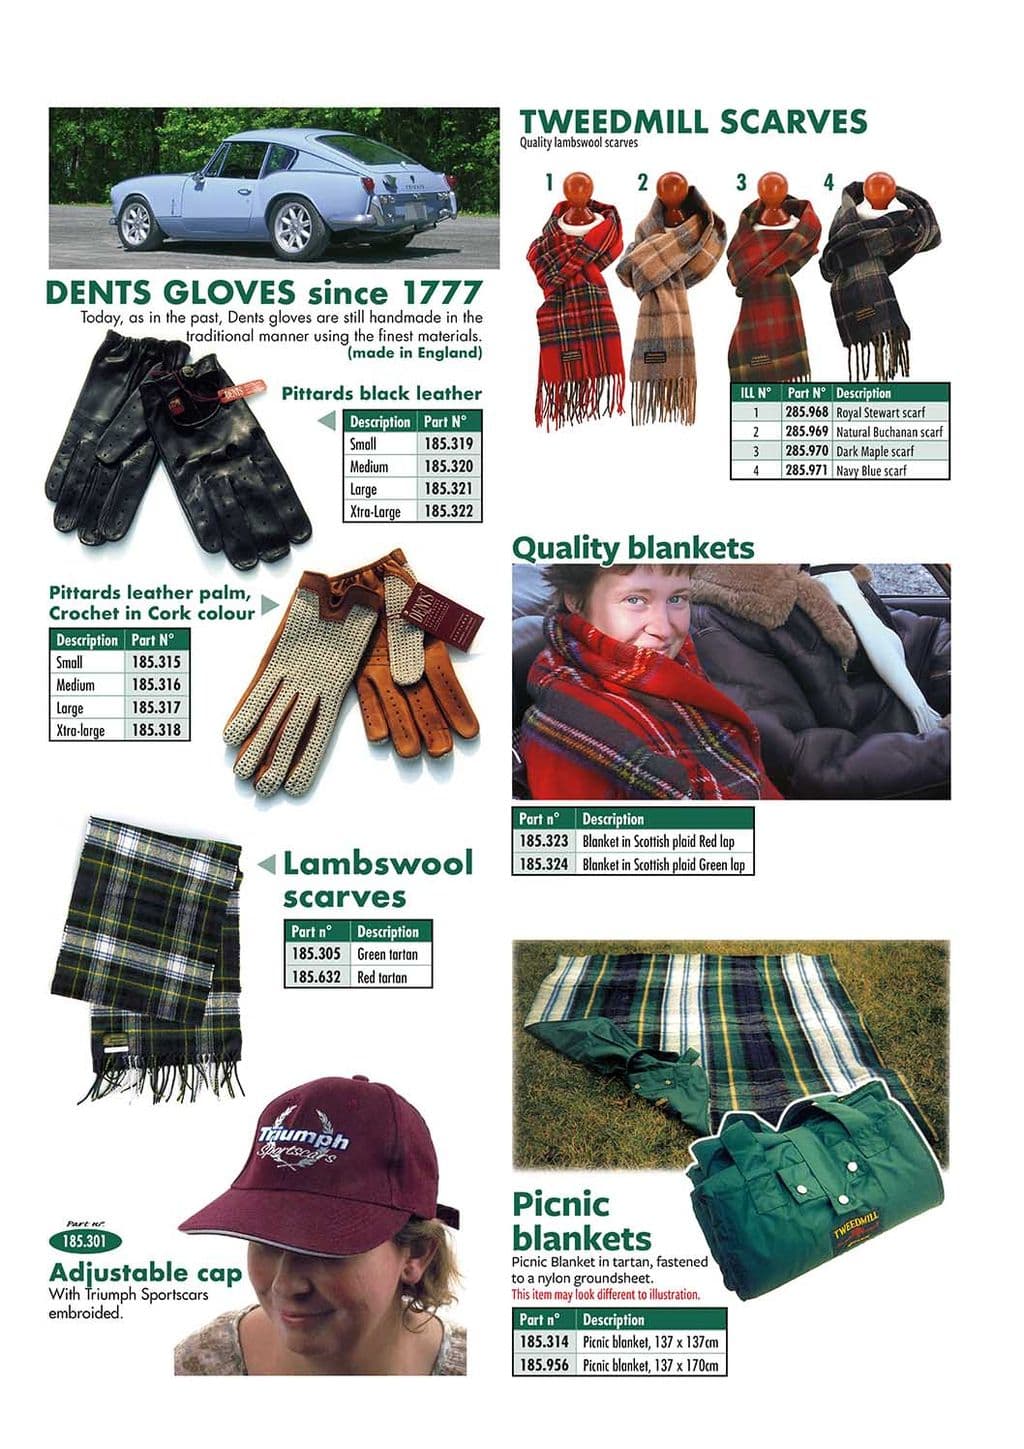 Drivers accessories - Hats & gloves - Books & Driver accessories - Mini 1969-2000 - Drivers accessories - 1